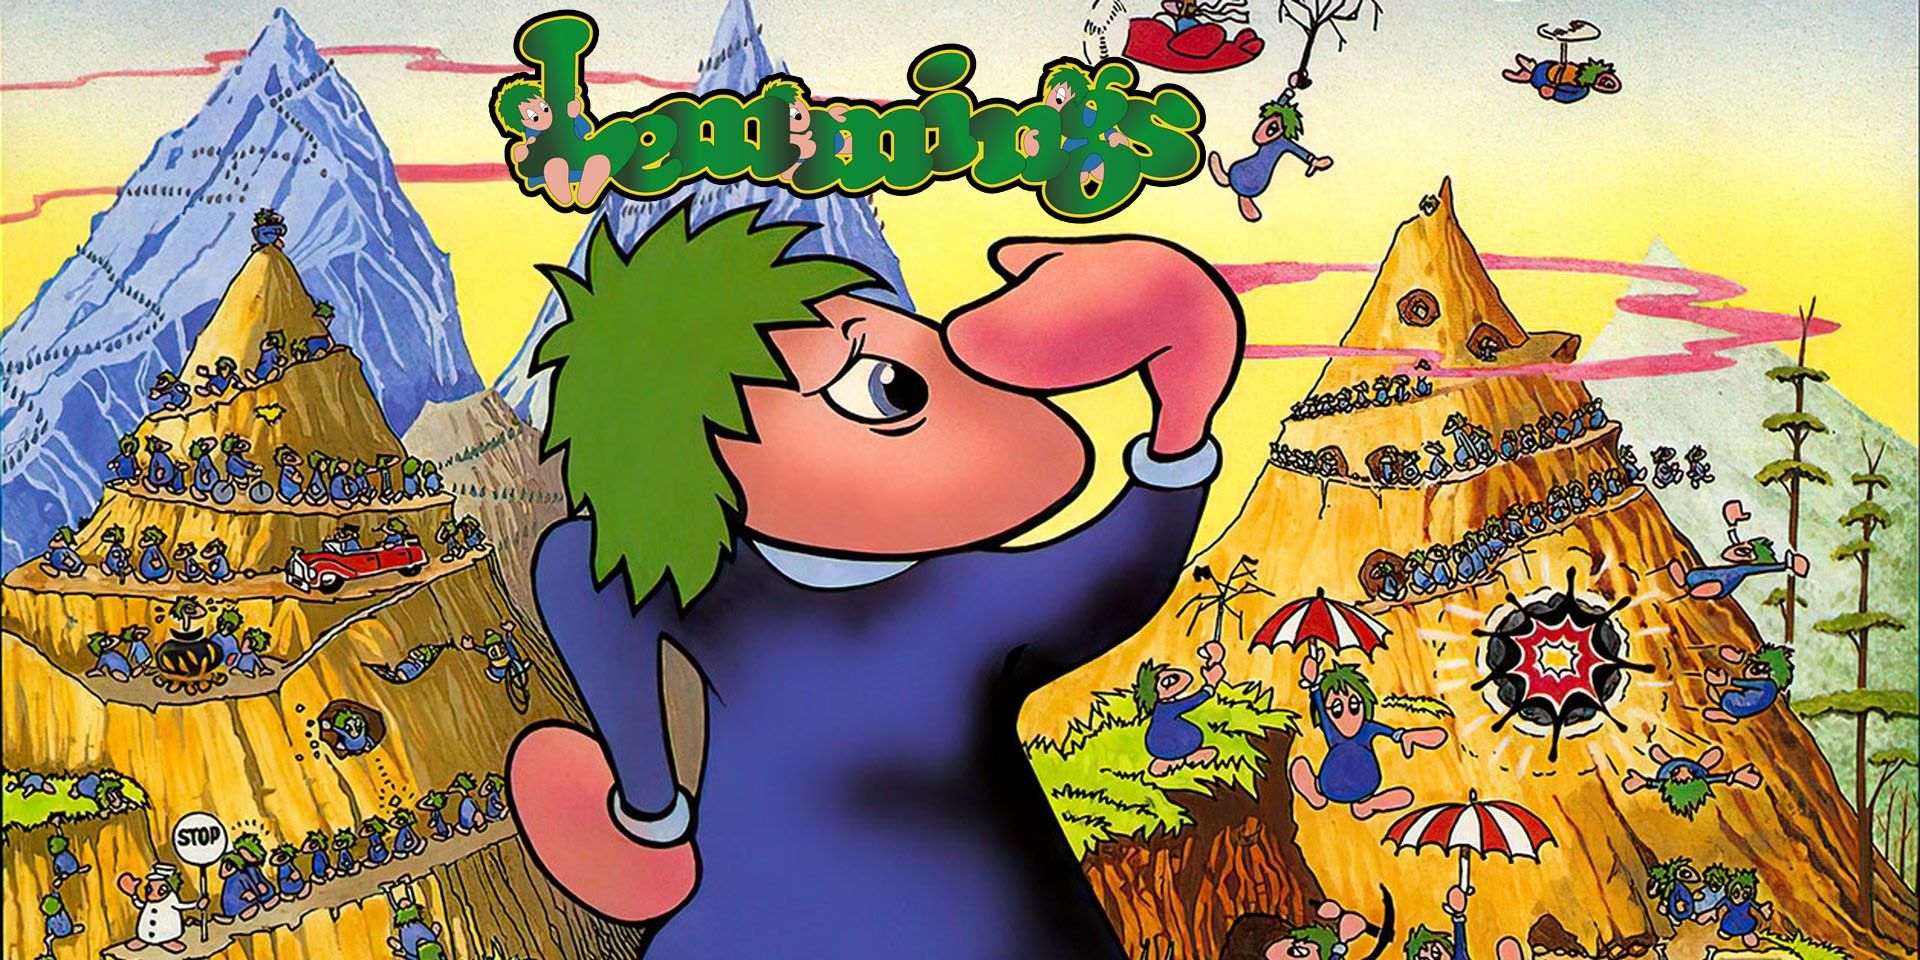 Lemmings promotional poster